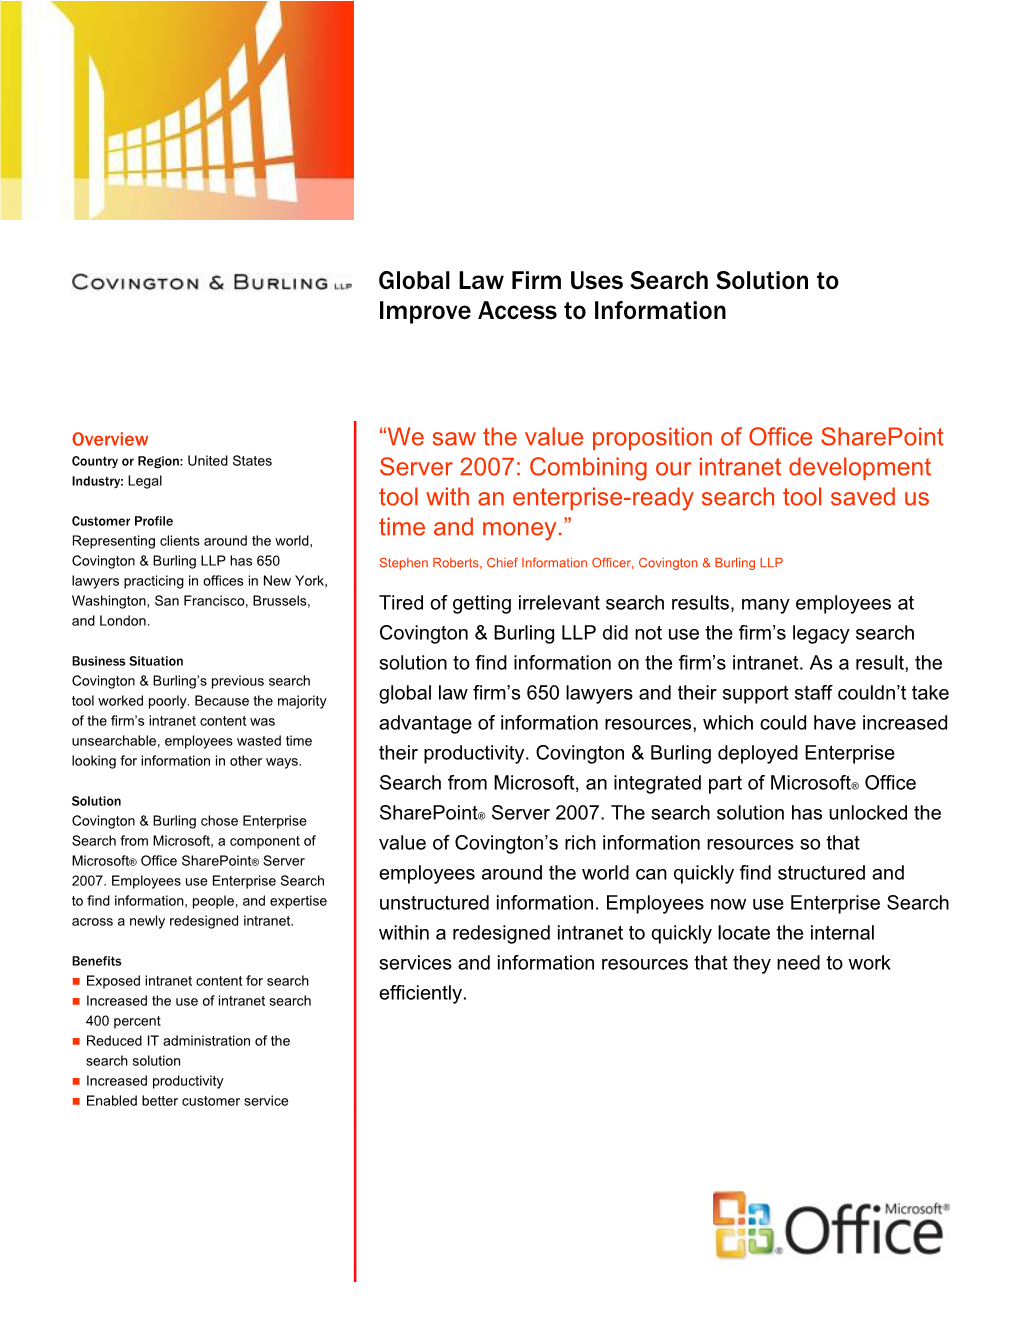 Global Law Firm Uses Search Solution to Improve Access to Information